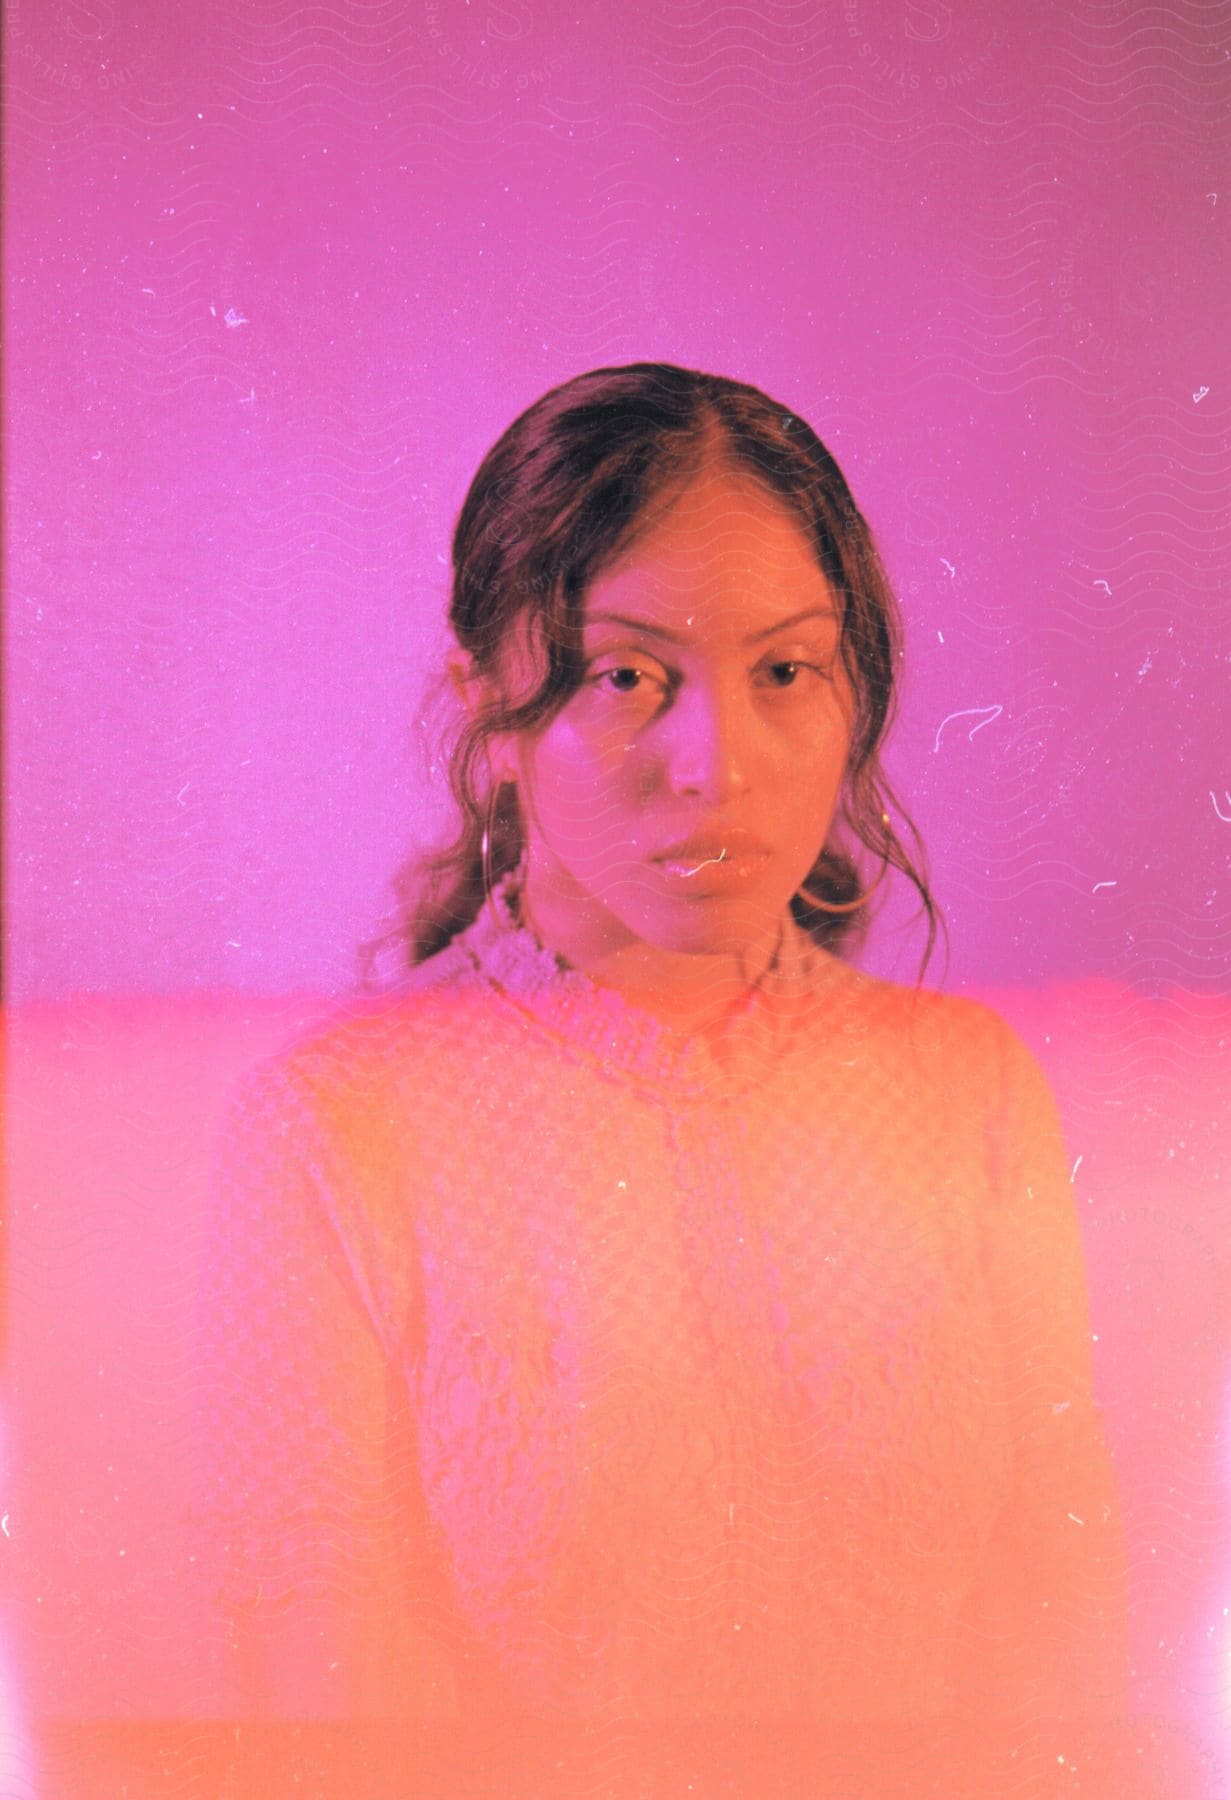 A portrait of a young woman in pink and orange lighting